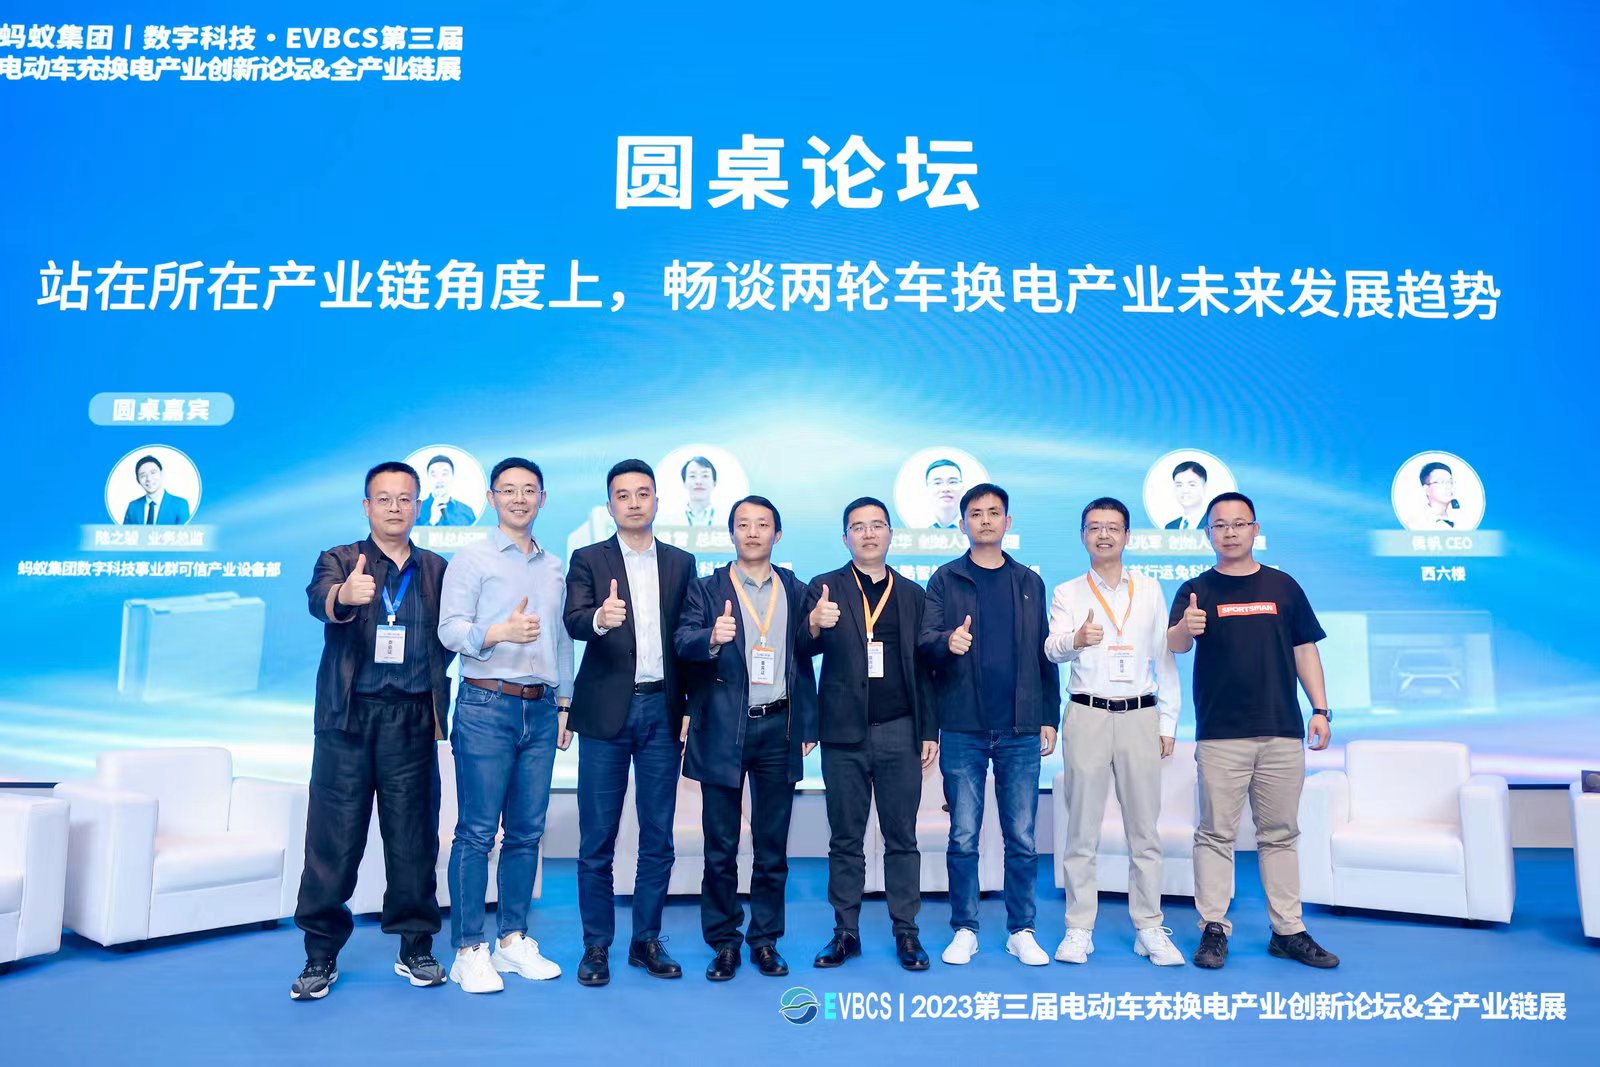 DK—#The 3rd Electric Vehicle Charging and Swapping Industry Innovation Forum & Whole Industry Chain Exhibition